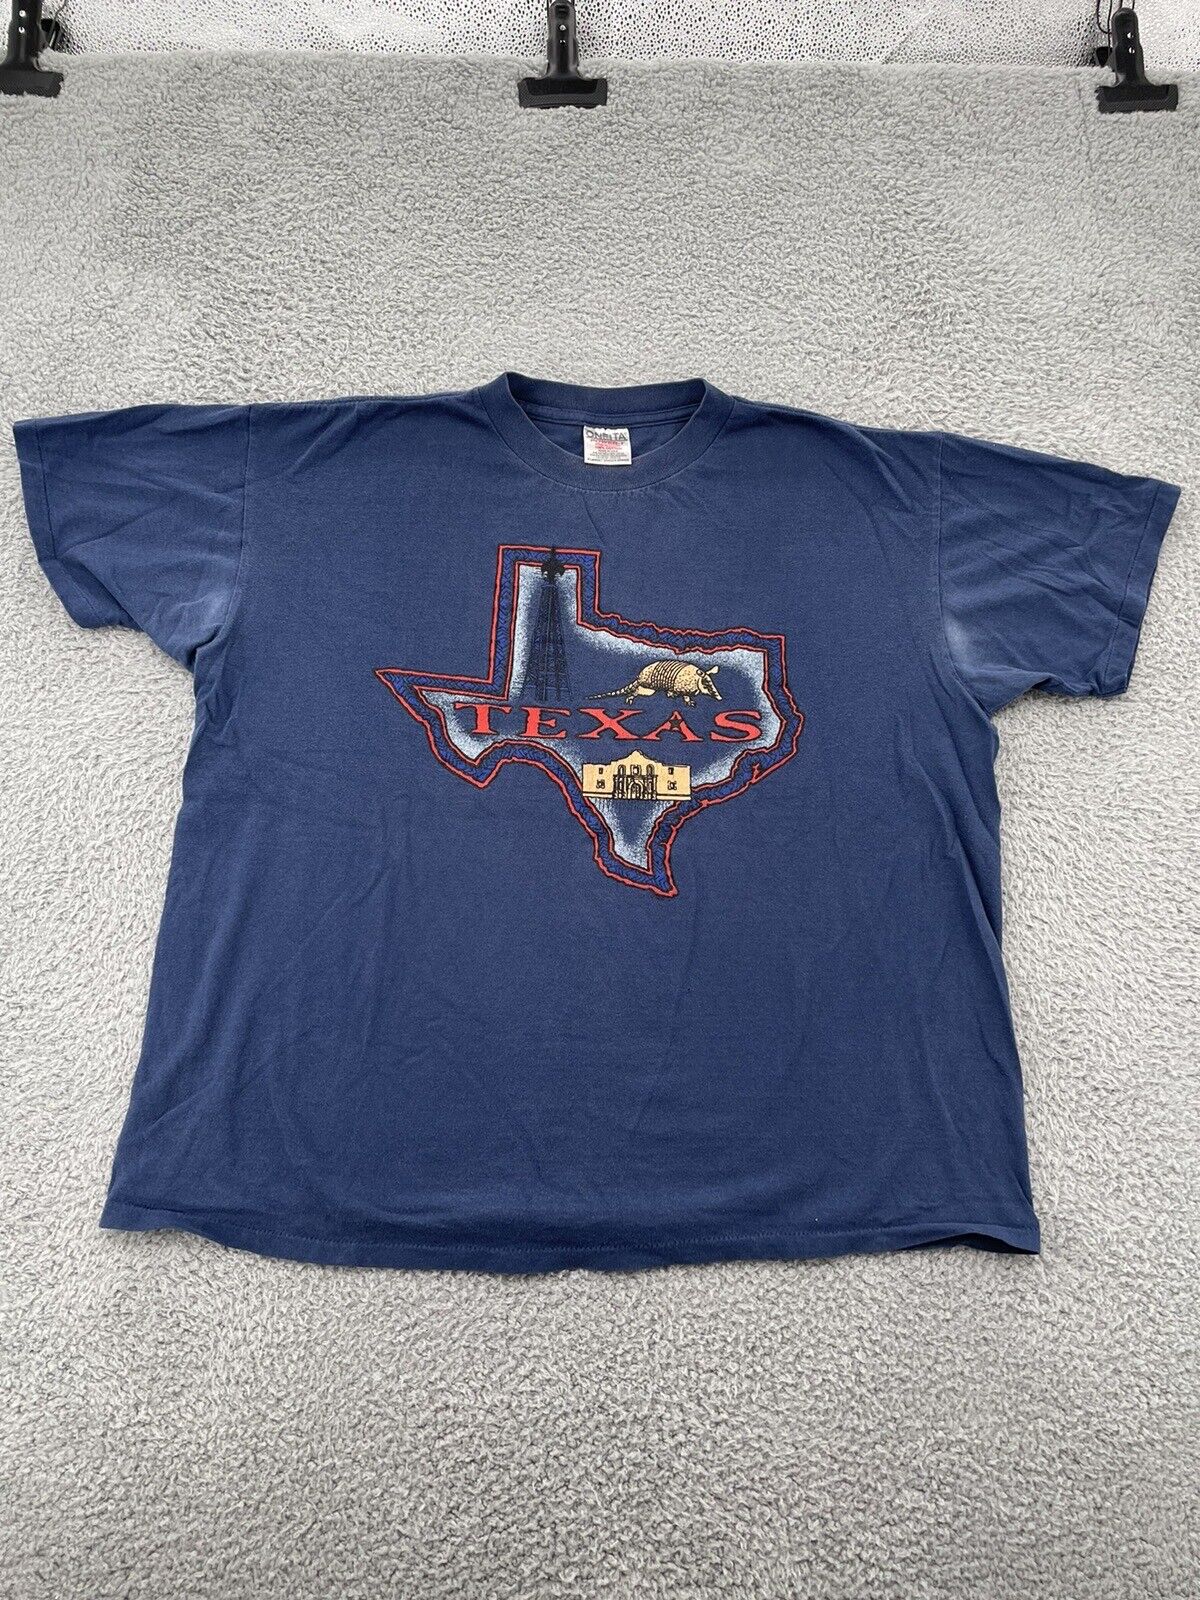 VINTAGE Texas Shirt Adult XL Extra Large Blue  Single Stitch Made in USA 90s